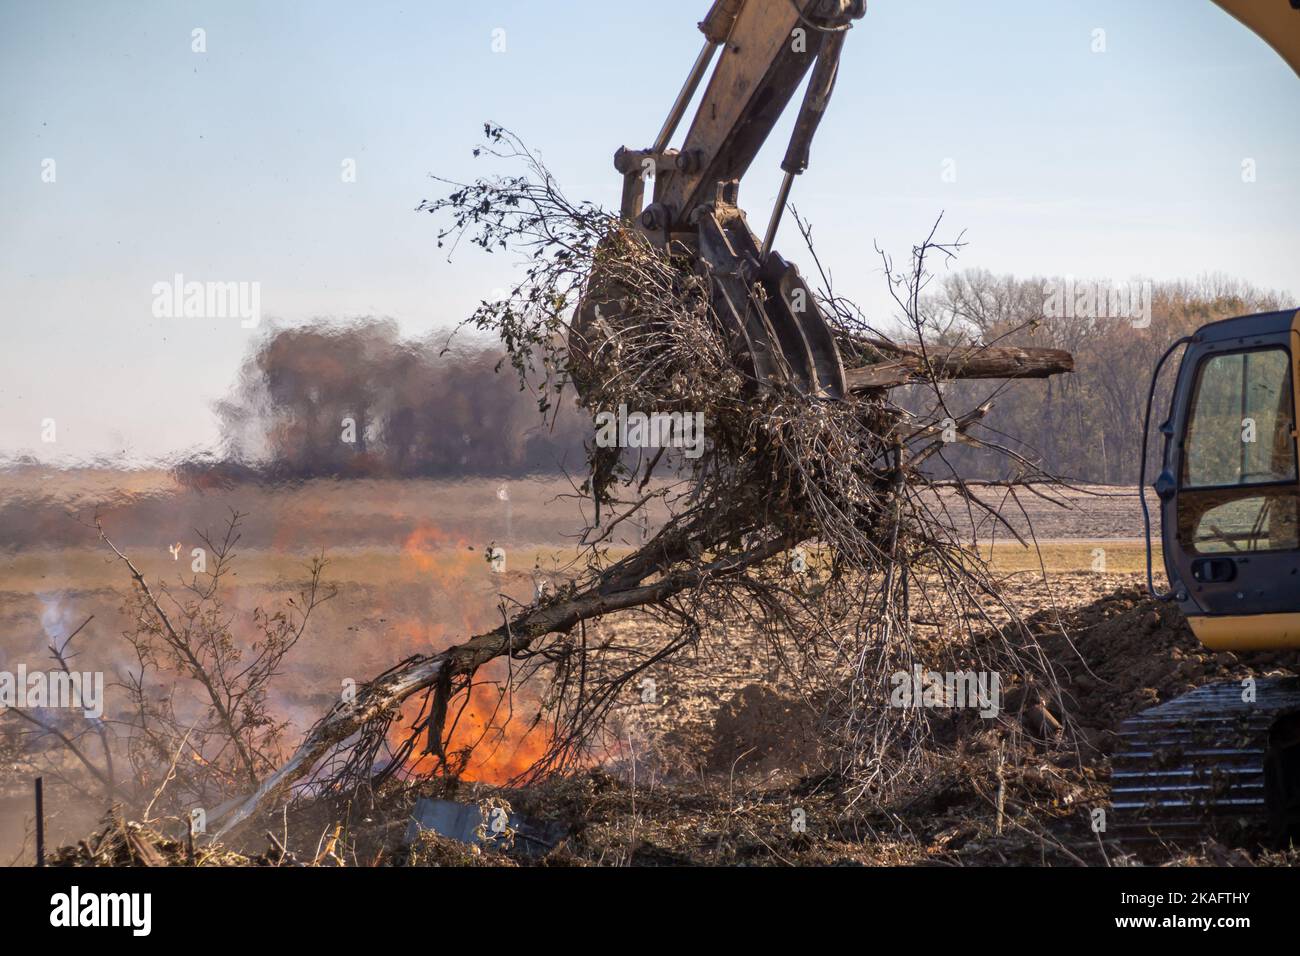 Close up view of a heavy equipment excavator moving trees and wooden debris into a fire pit near the area of a demolished old farm building Stock Photo